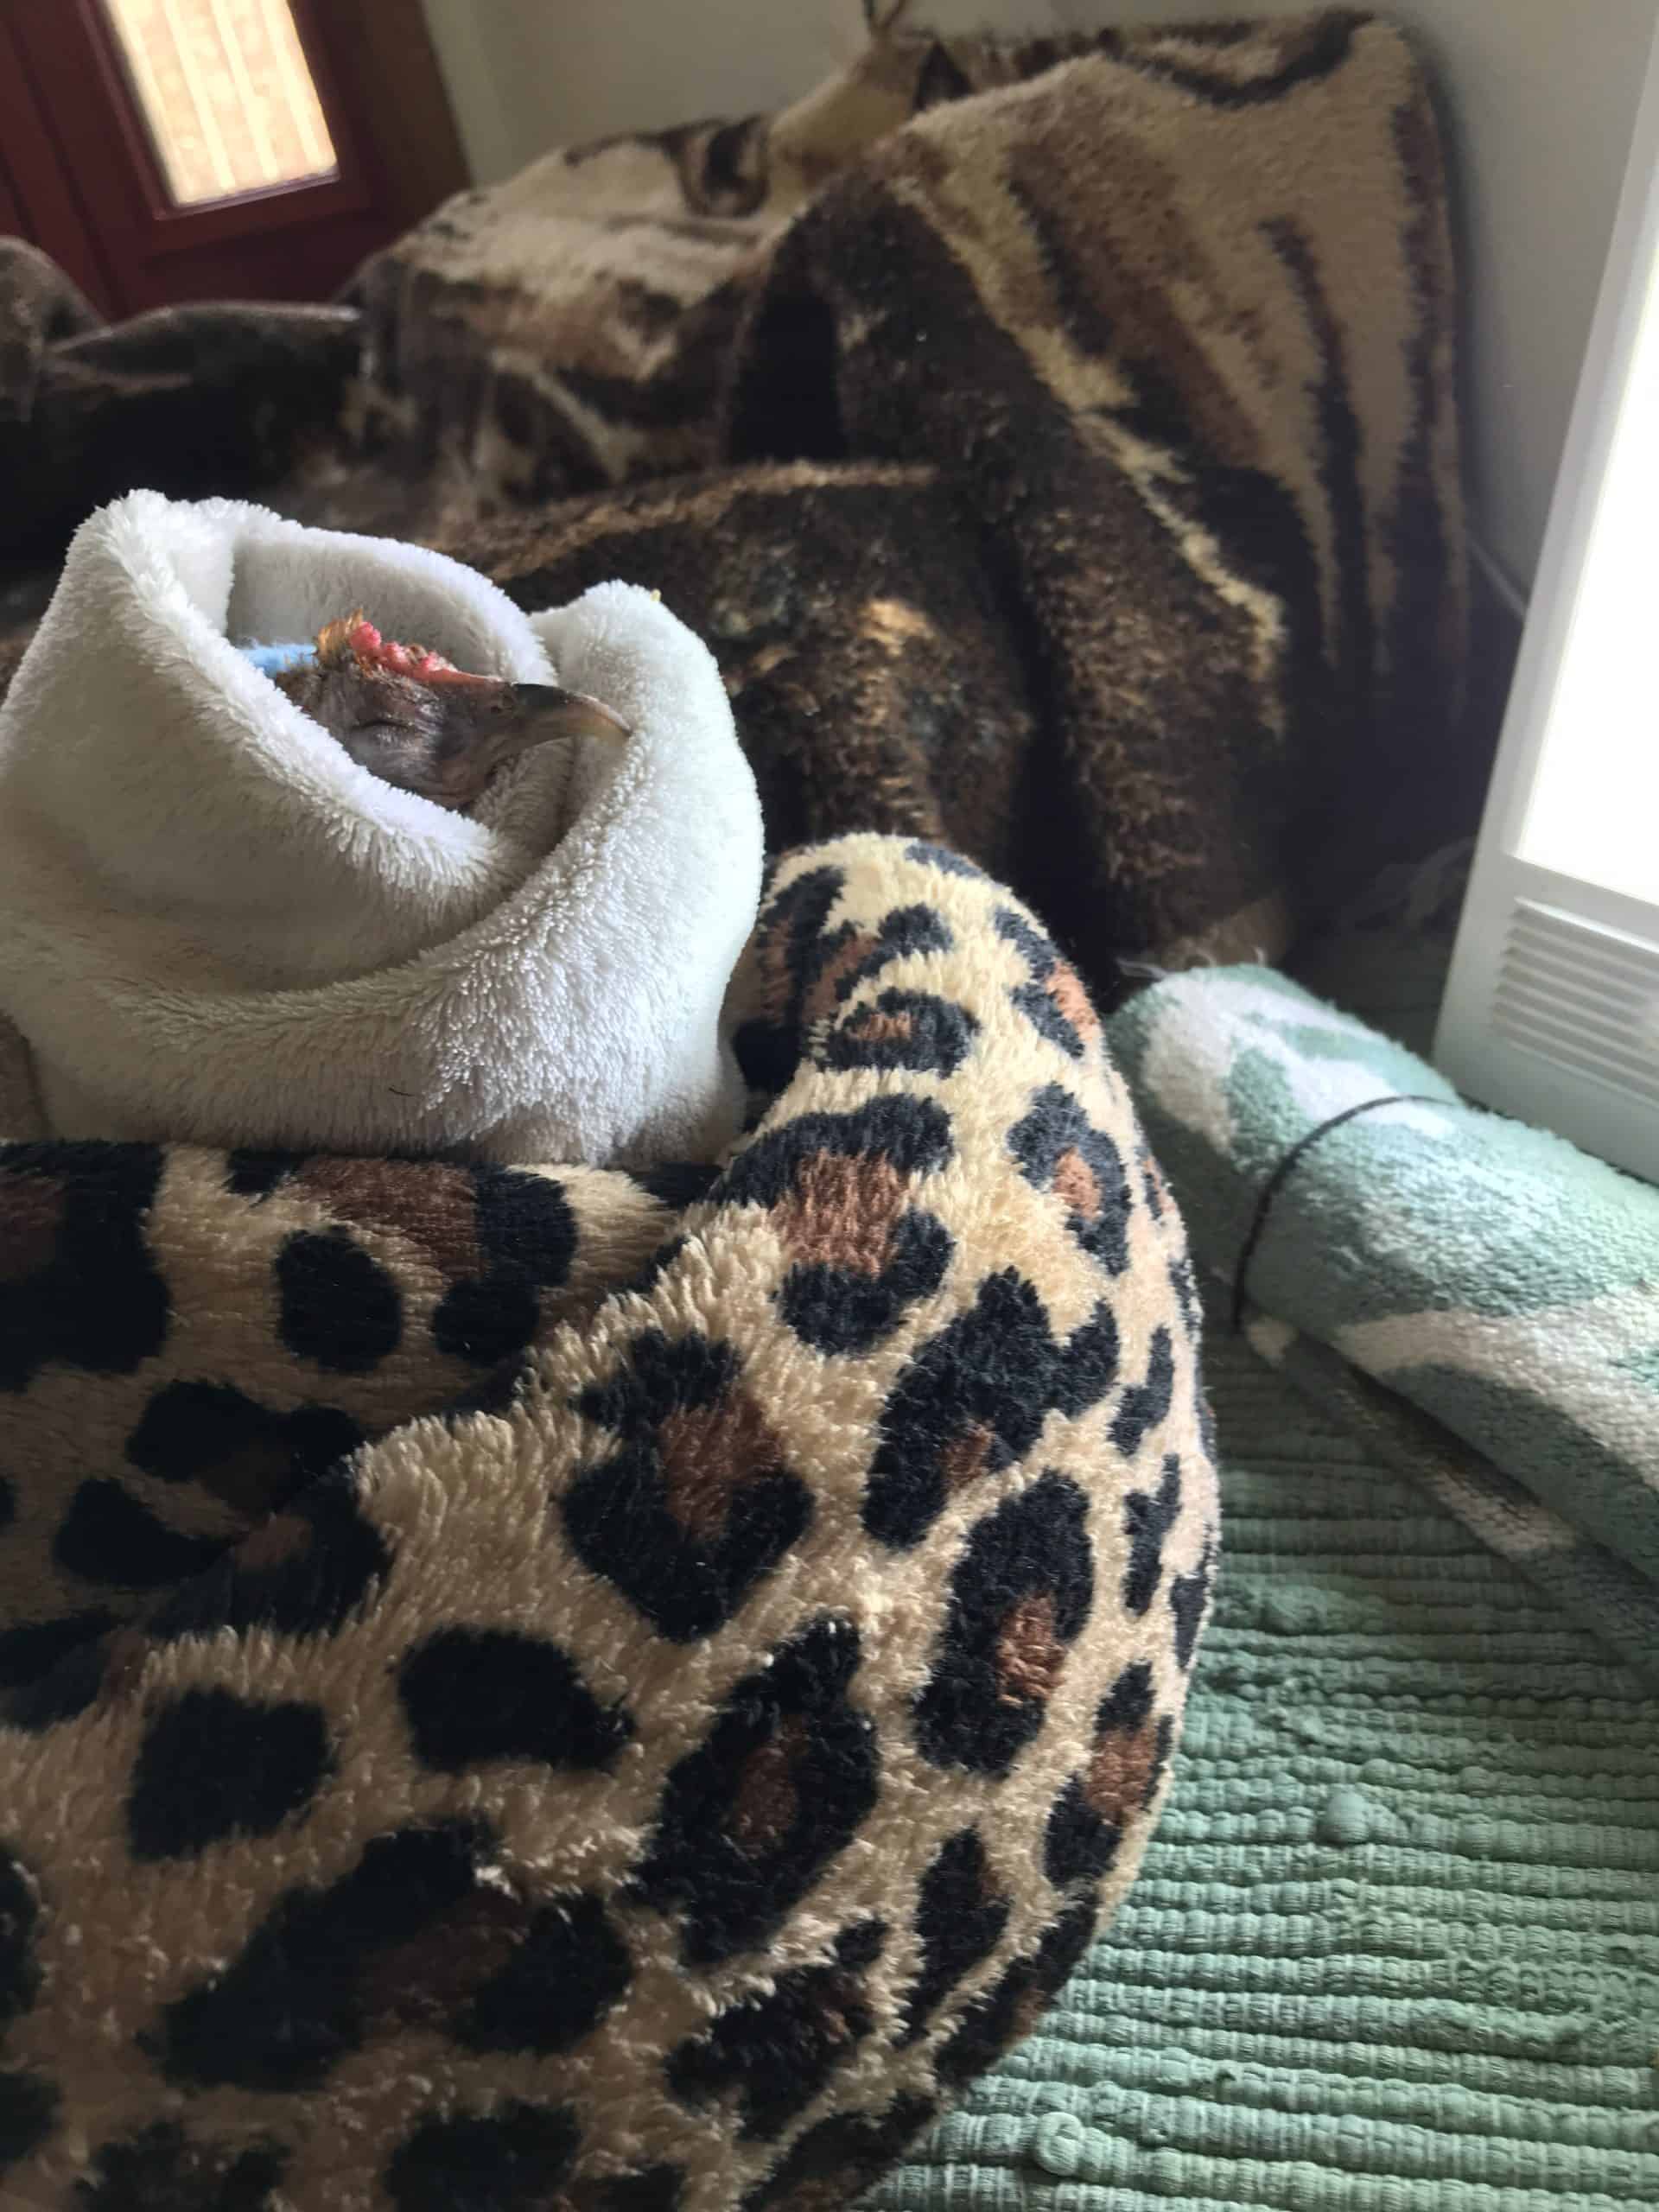 A small hen’s head pokes out of a white plush blanket that is nestled inside a nest made from a folded cheetah print blanket. Her eyes are closed.